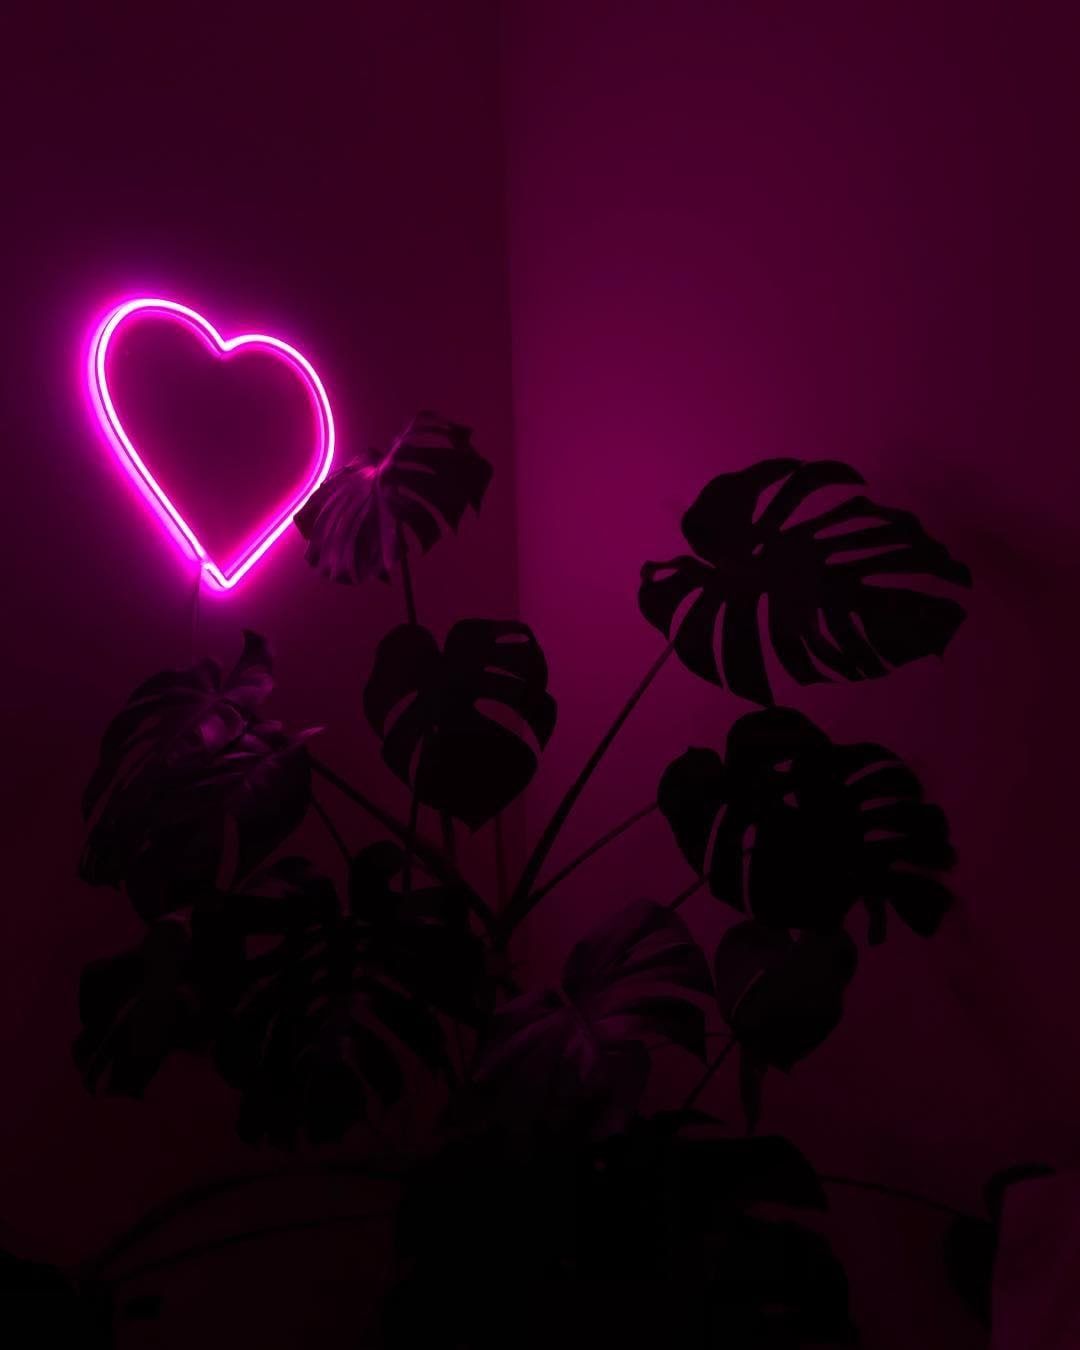 A neon pink heart on a purple wall with a plant in the foreground - Neon